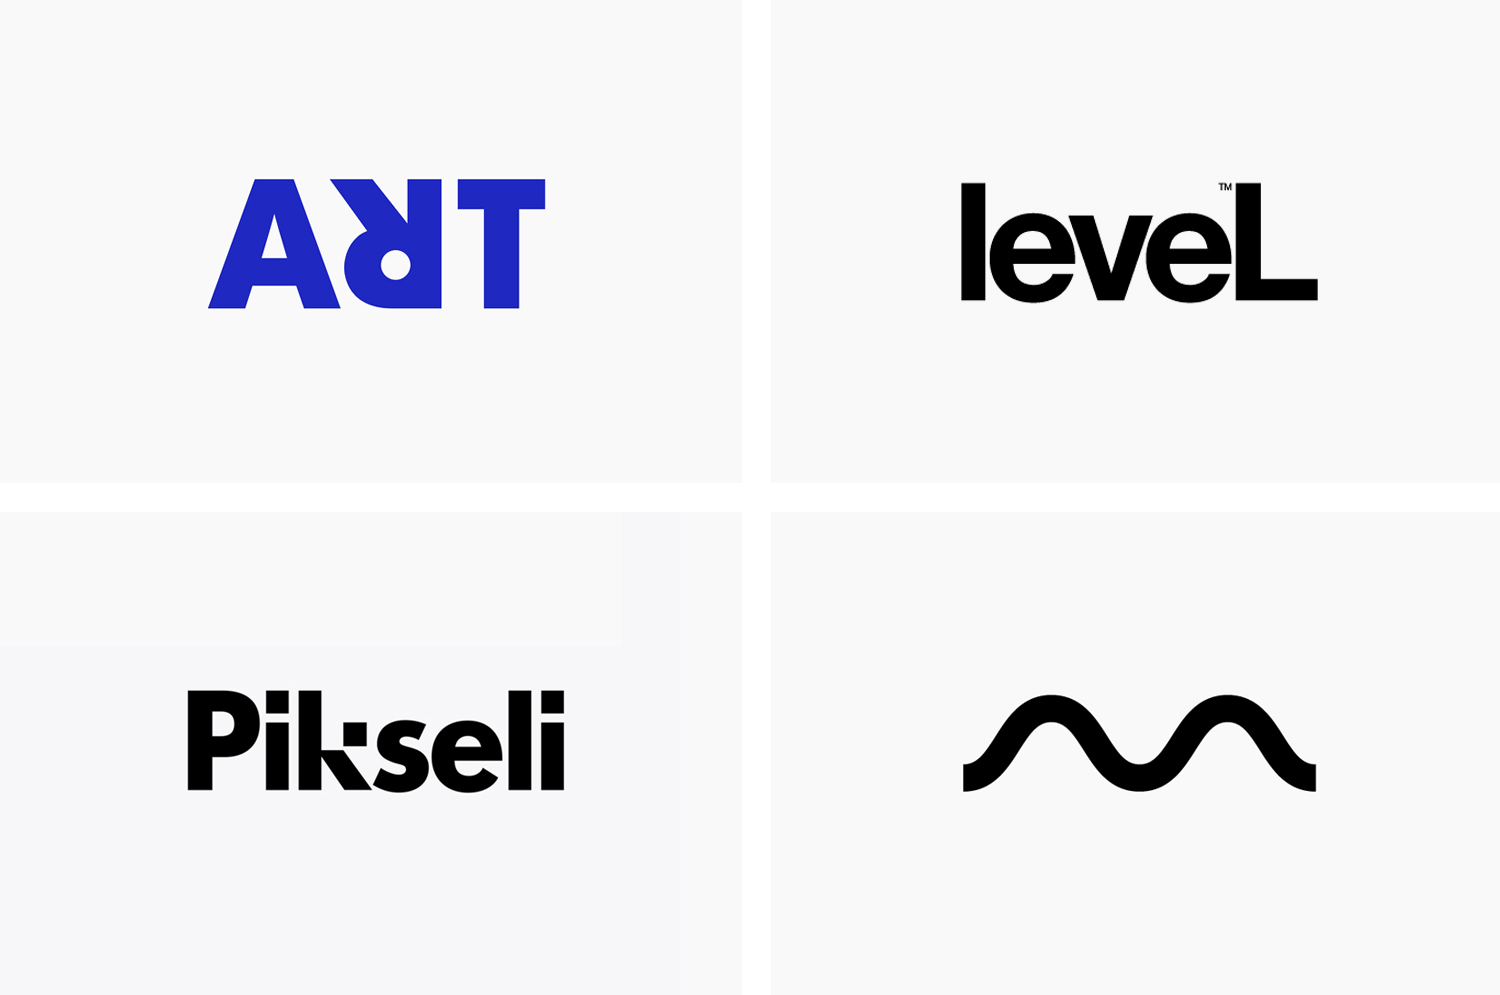 Minimalist Logos: How Simple Designs Are Taking Over the Branding World